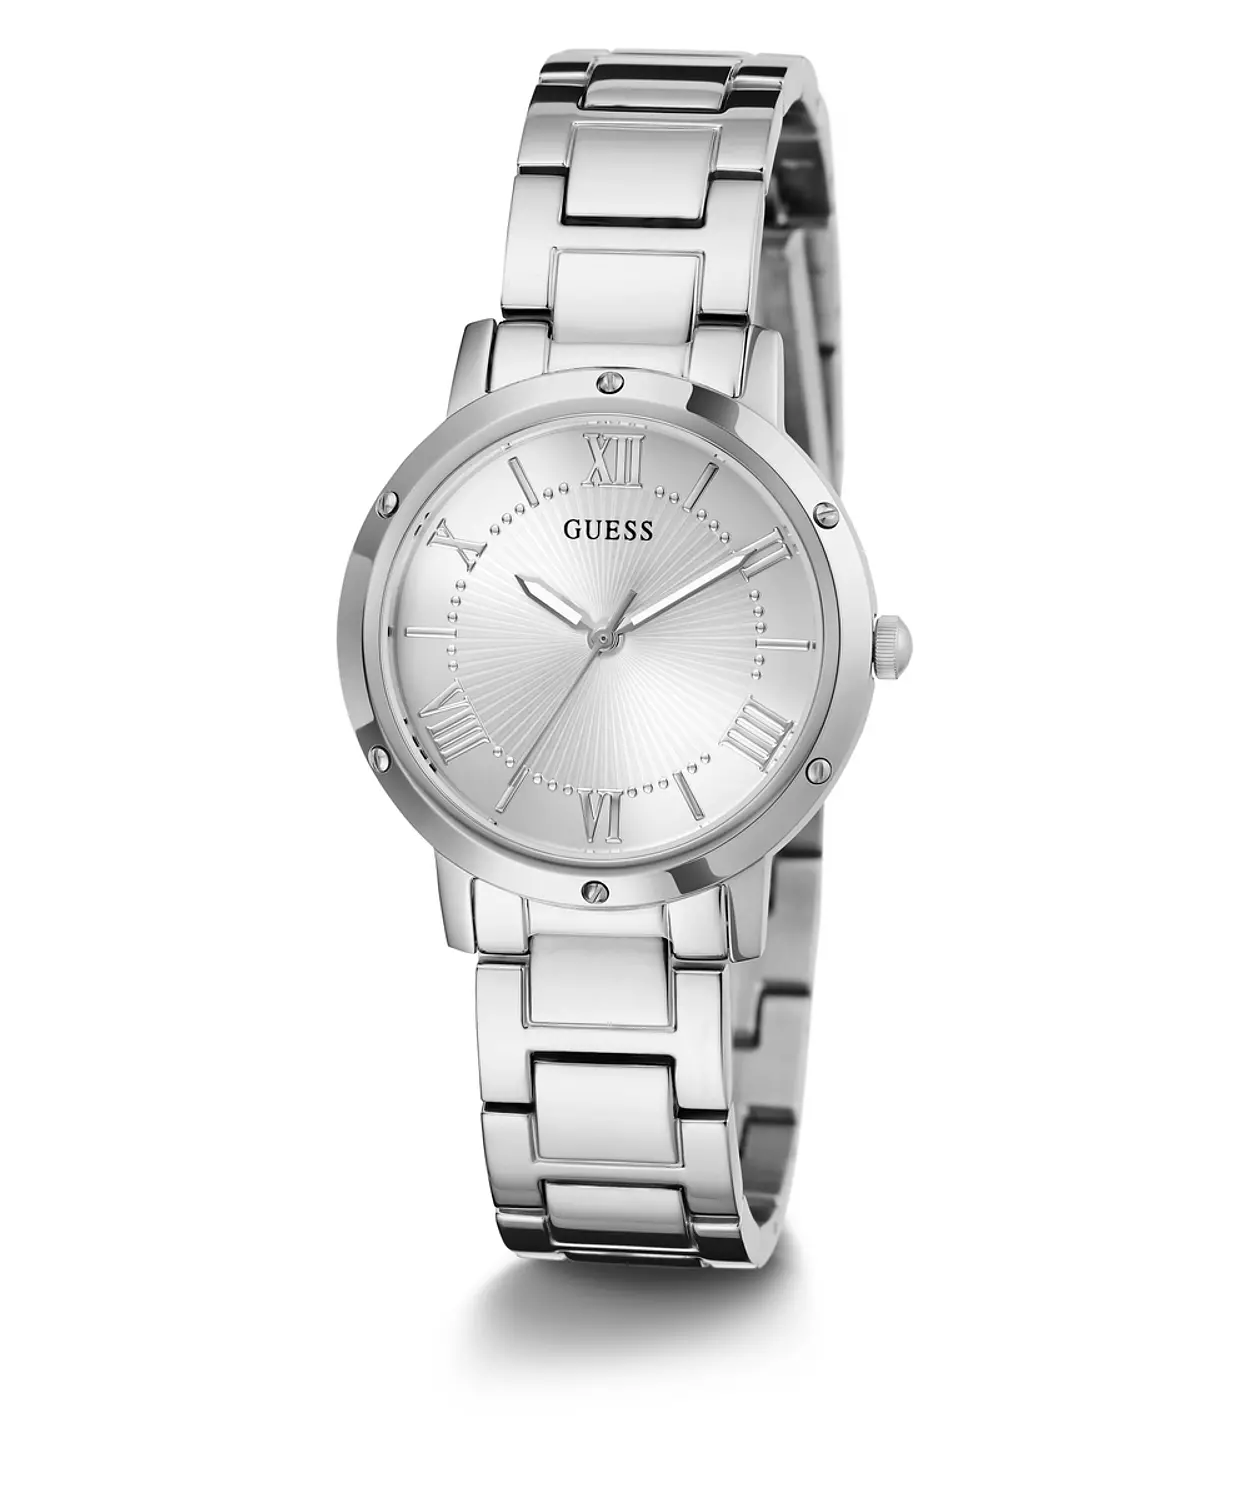 GUESS GW0404L1 ANALOG WATCH  For Women Silver Stainless Steel Polished Bracelet  6